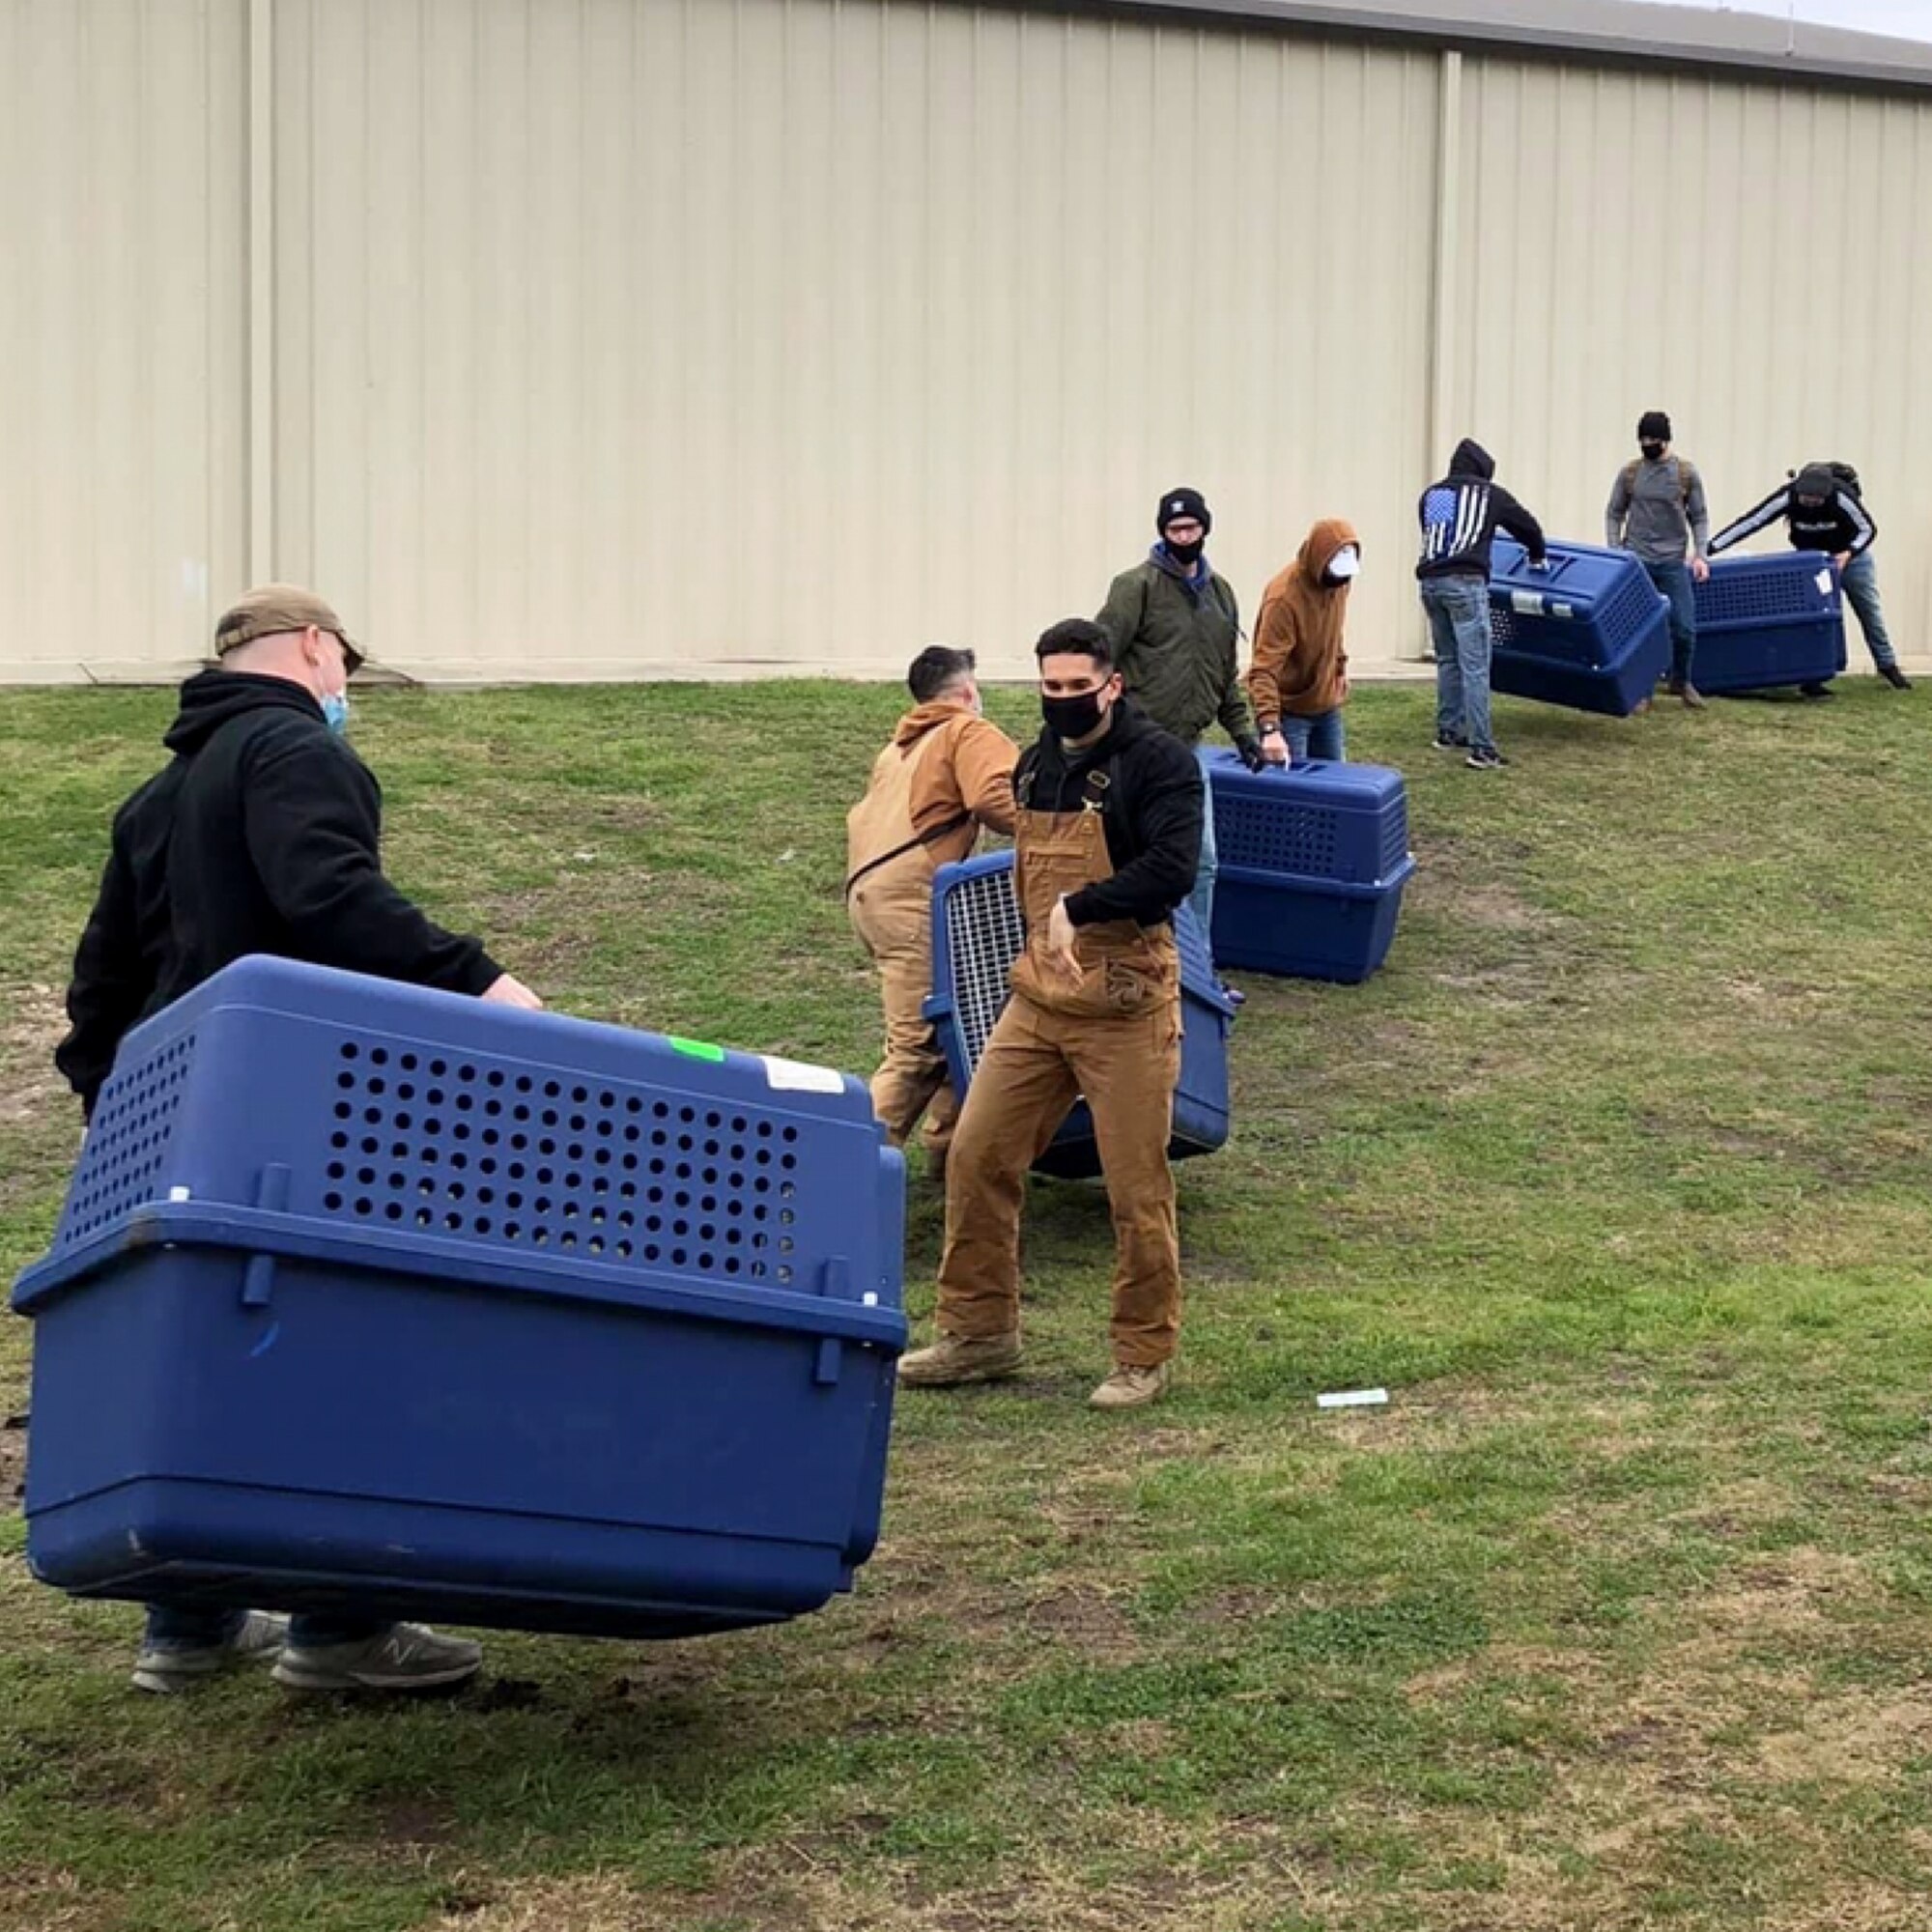 Approximately 300 volunteers helped move over 800 military working dogs to safety during a winter storm in the San Antonio area the week of Feb. 15, 2021.